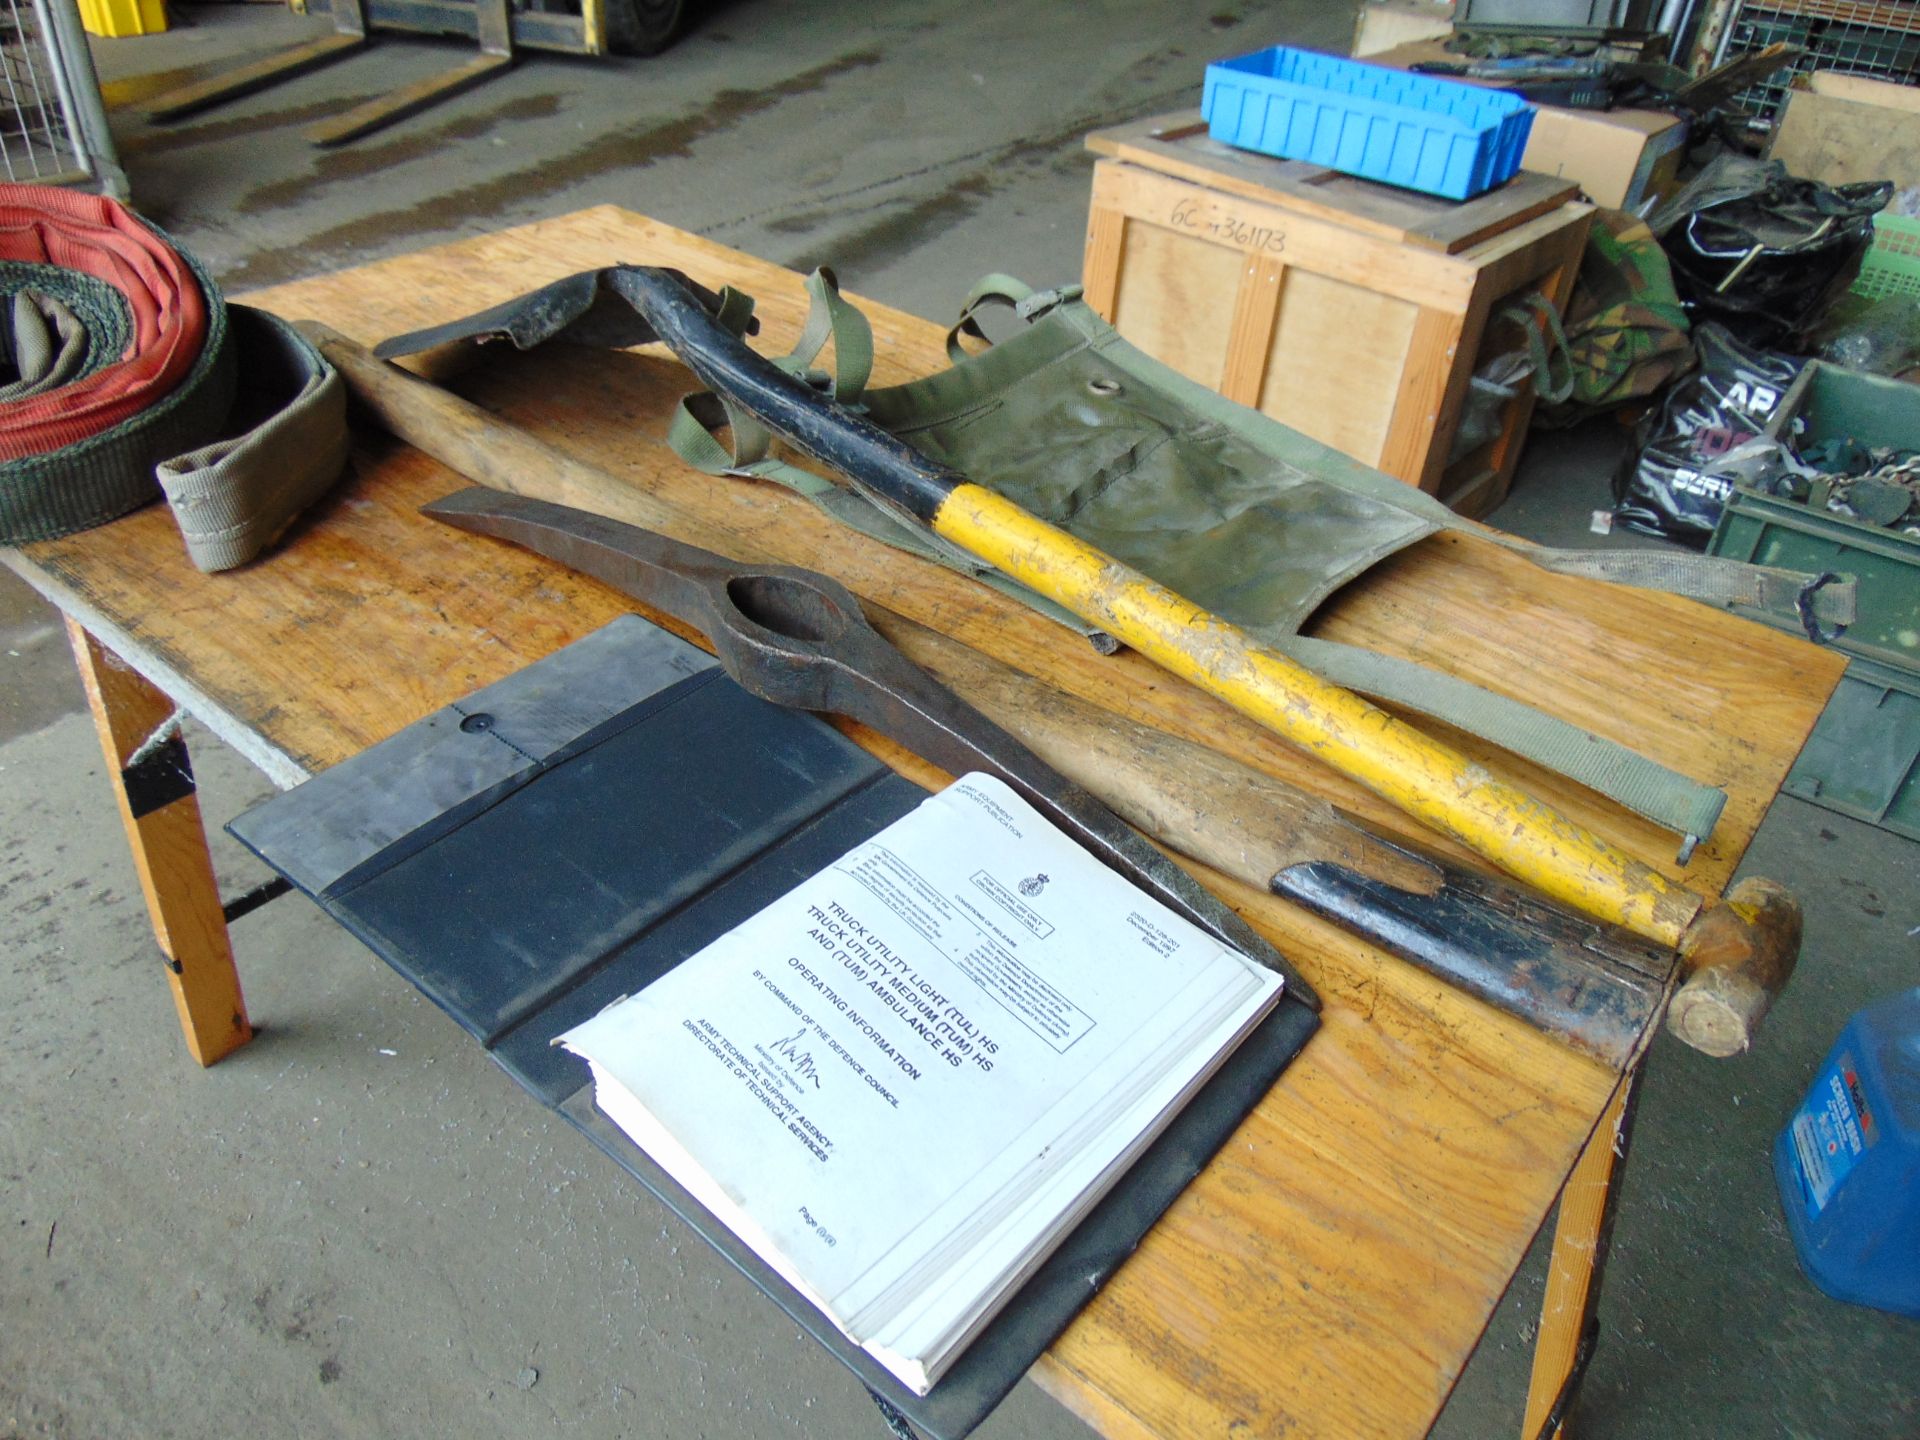 1 Set of Land Rover Wolf Pioneer Tools, Tow Rope, Spare Wheel Carrier and Manual - Image 5 of 7